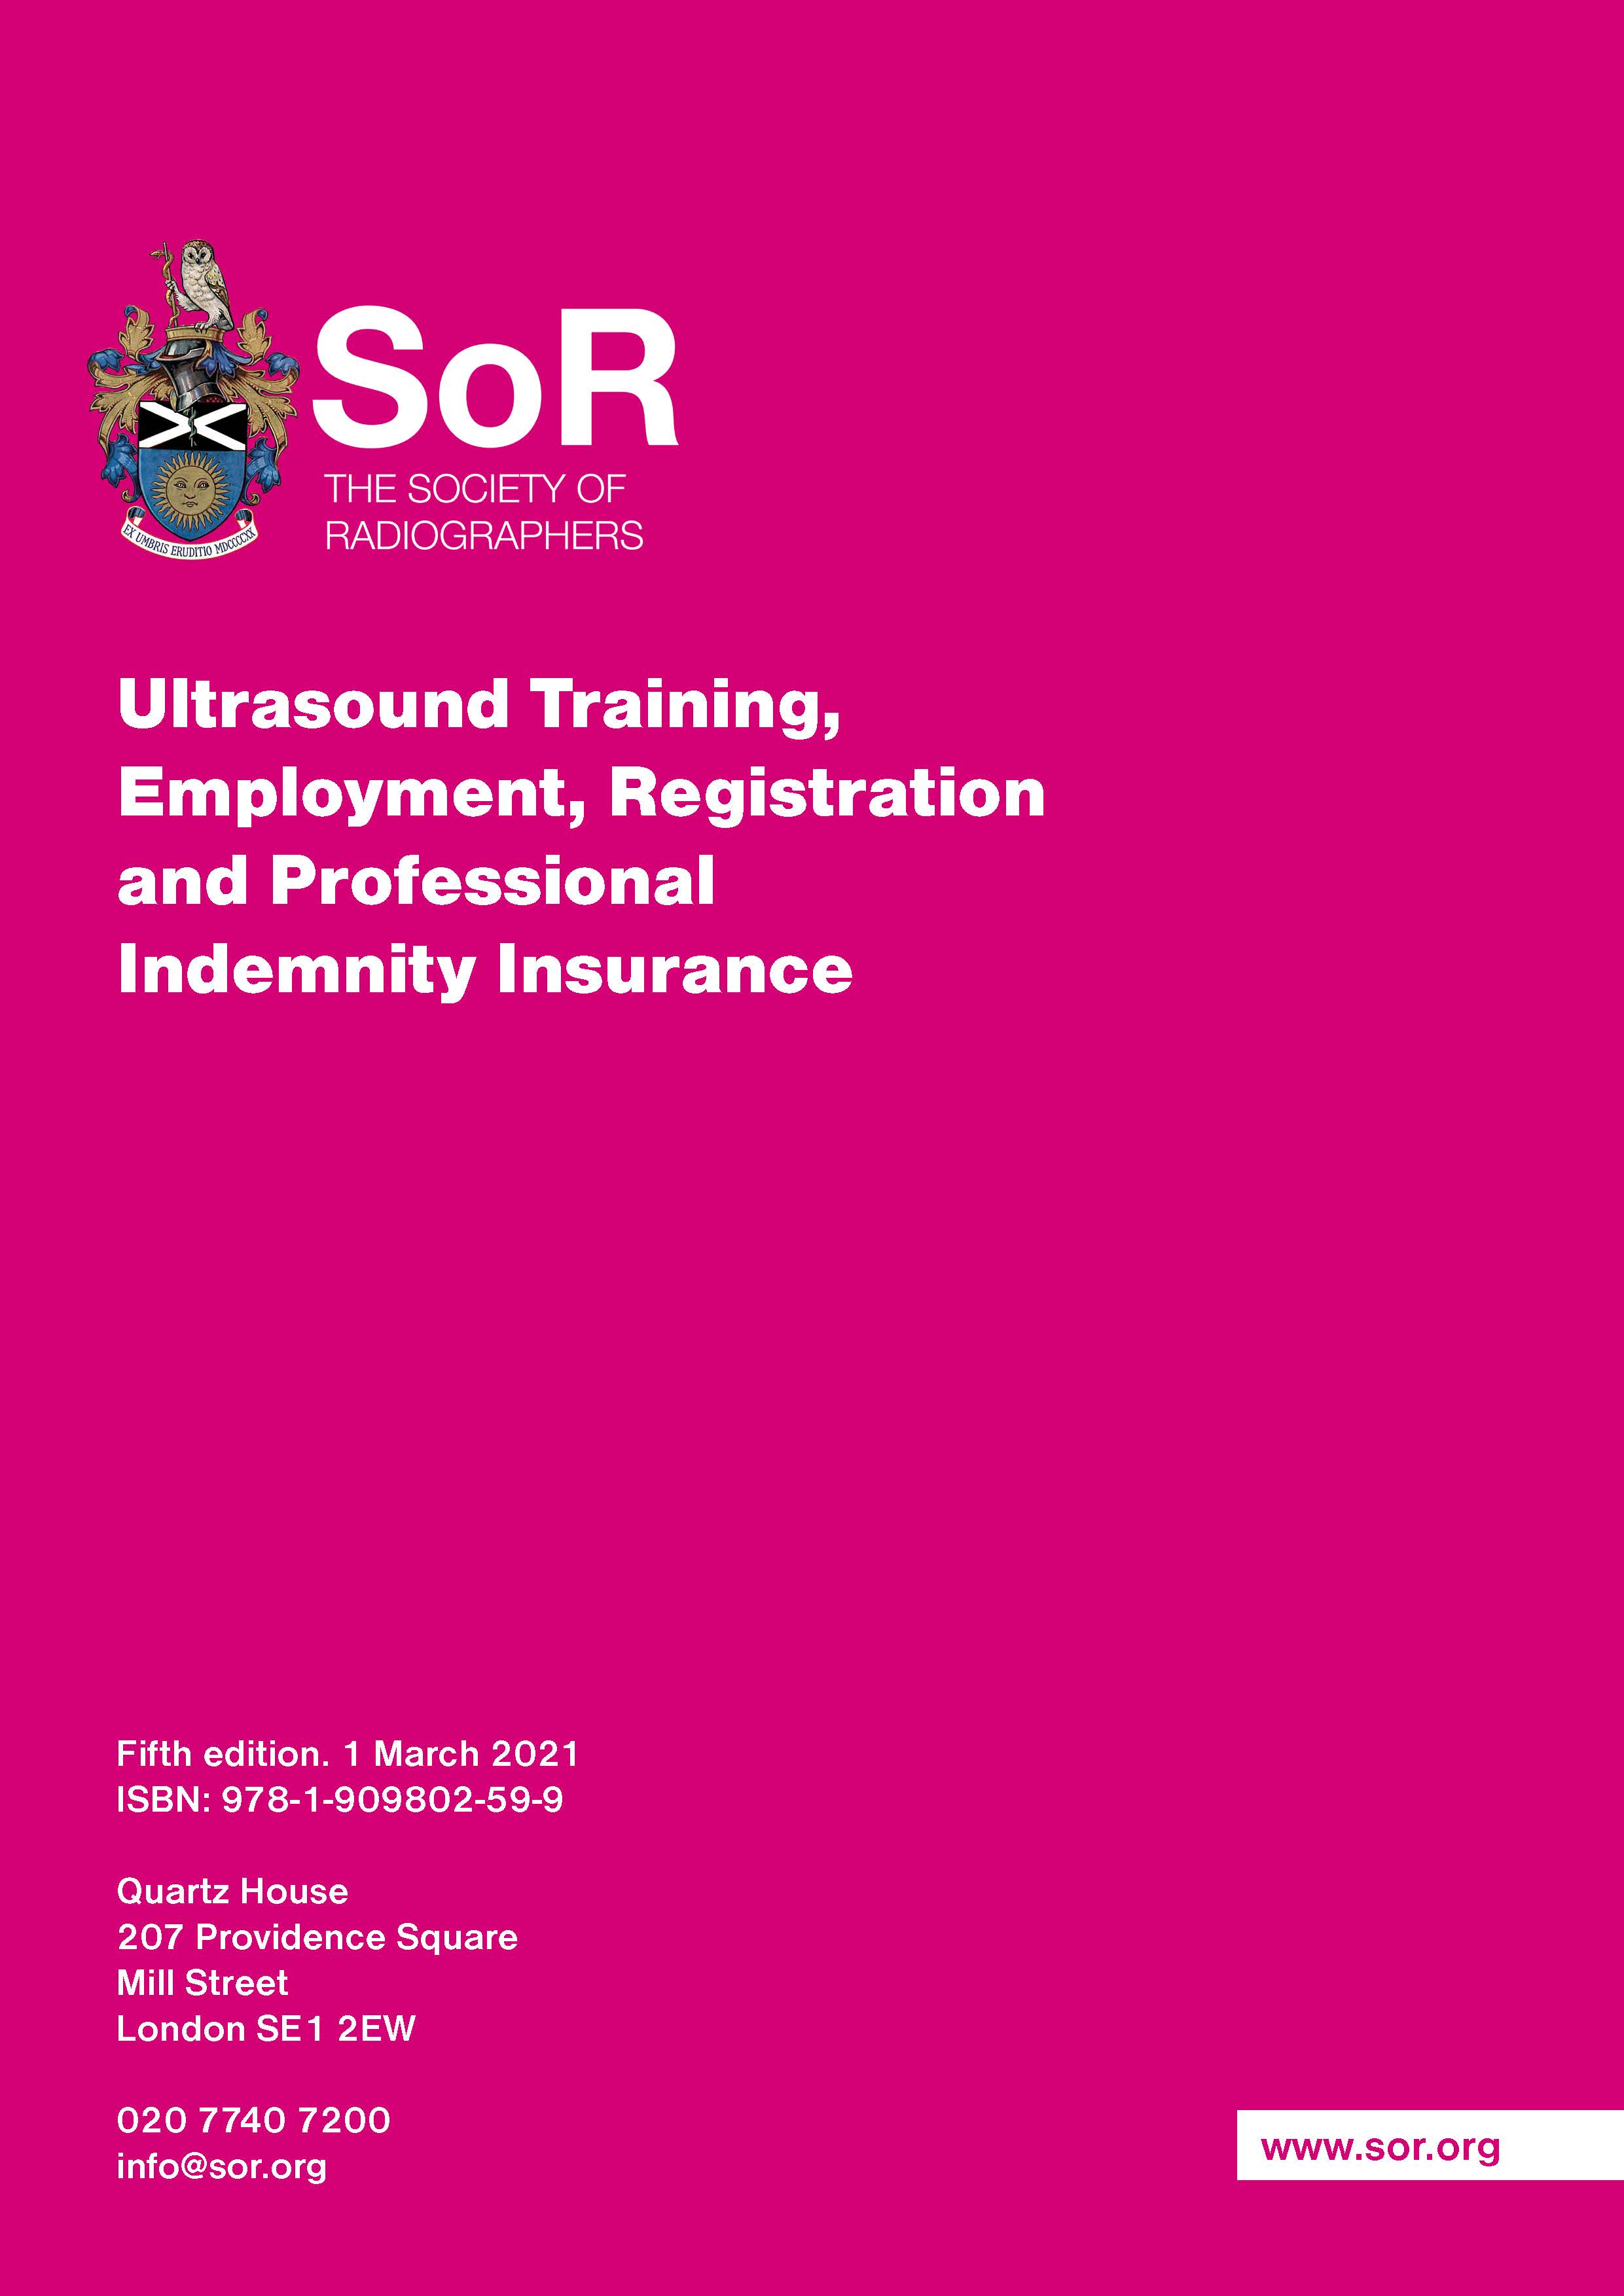 Ultrasound Training, Employment, Registration and Professional Indemnity Insurance